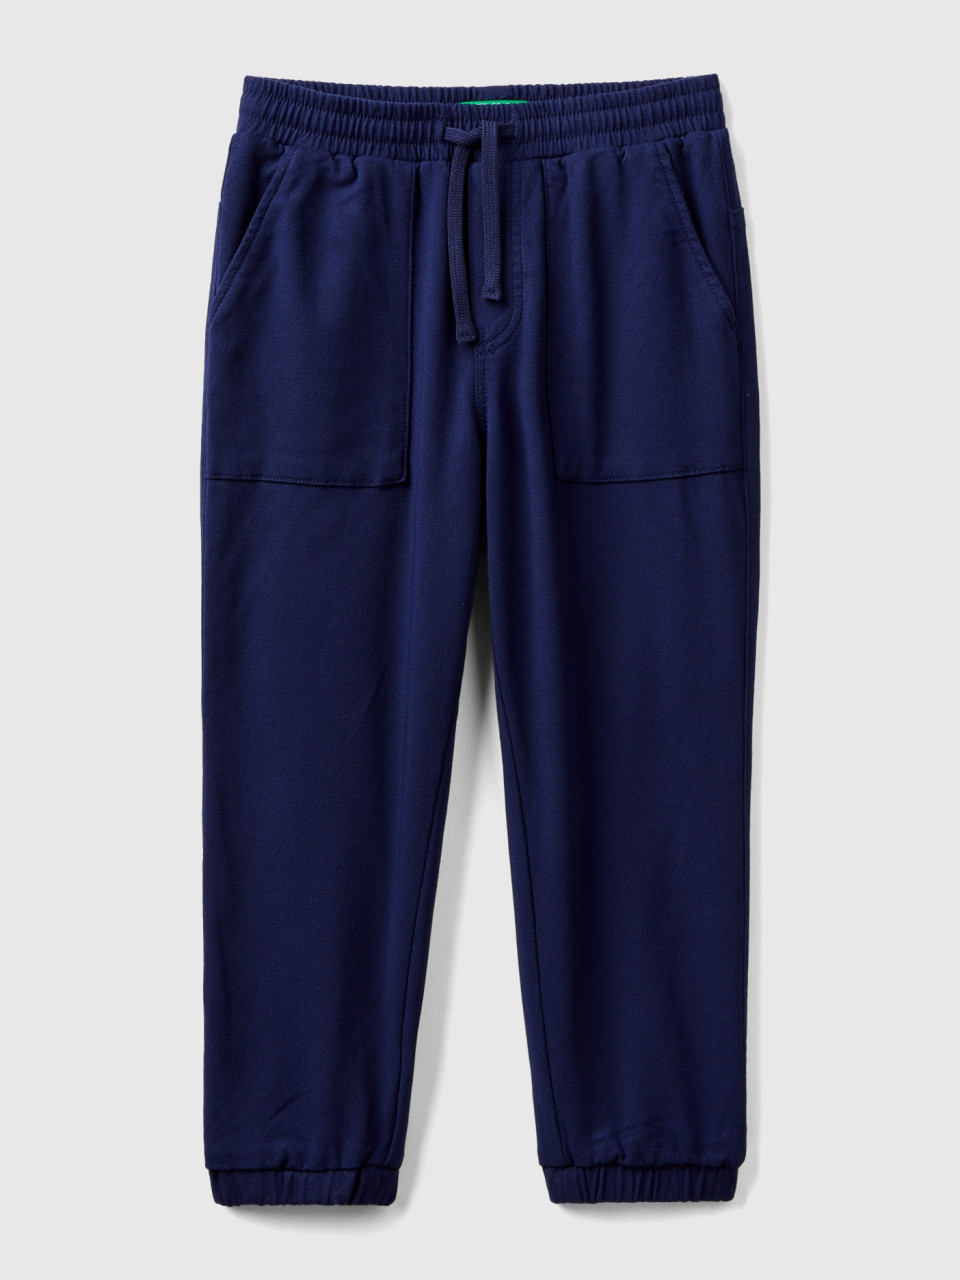 Benetton, Joggers With Drawstring And Maxi Pockets, Dark Blue, Kids